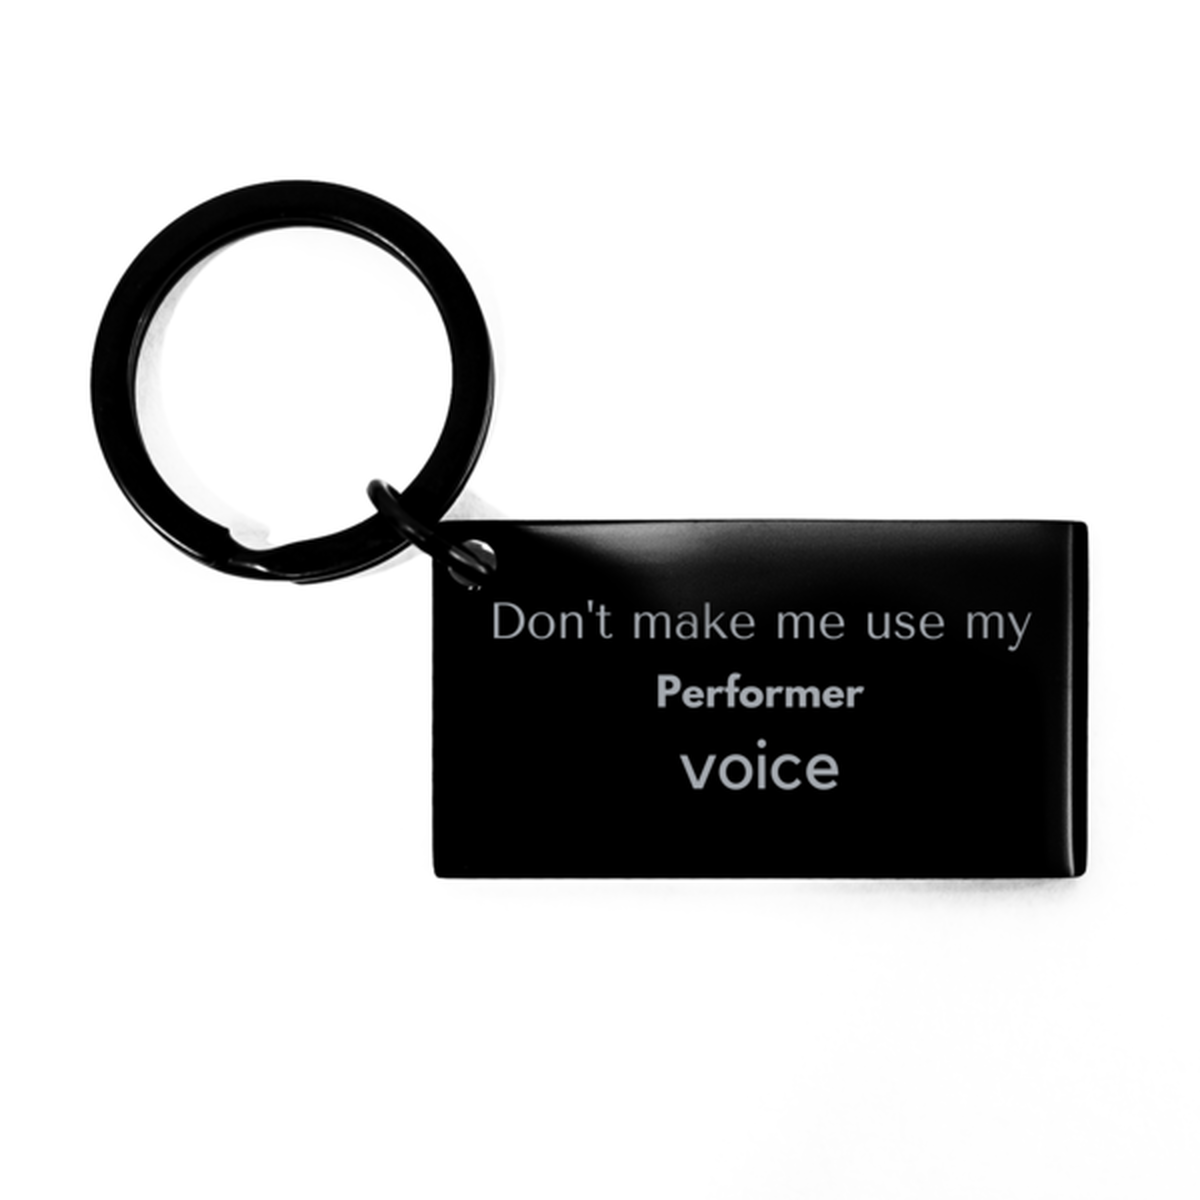 Don't make me use my Performer voice, Sarcasm Performer Gifts, Christmas Performer Keychain Birthday Unique Gifts For Performer Coworkers, Men, Women, Colleague, Friends